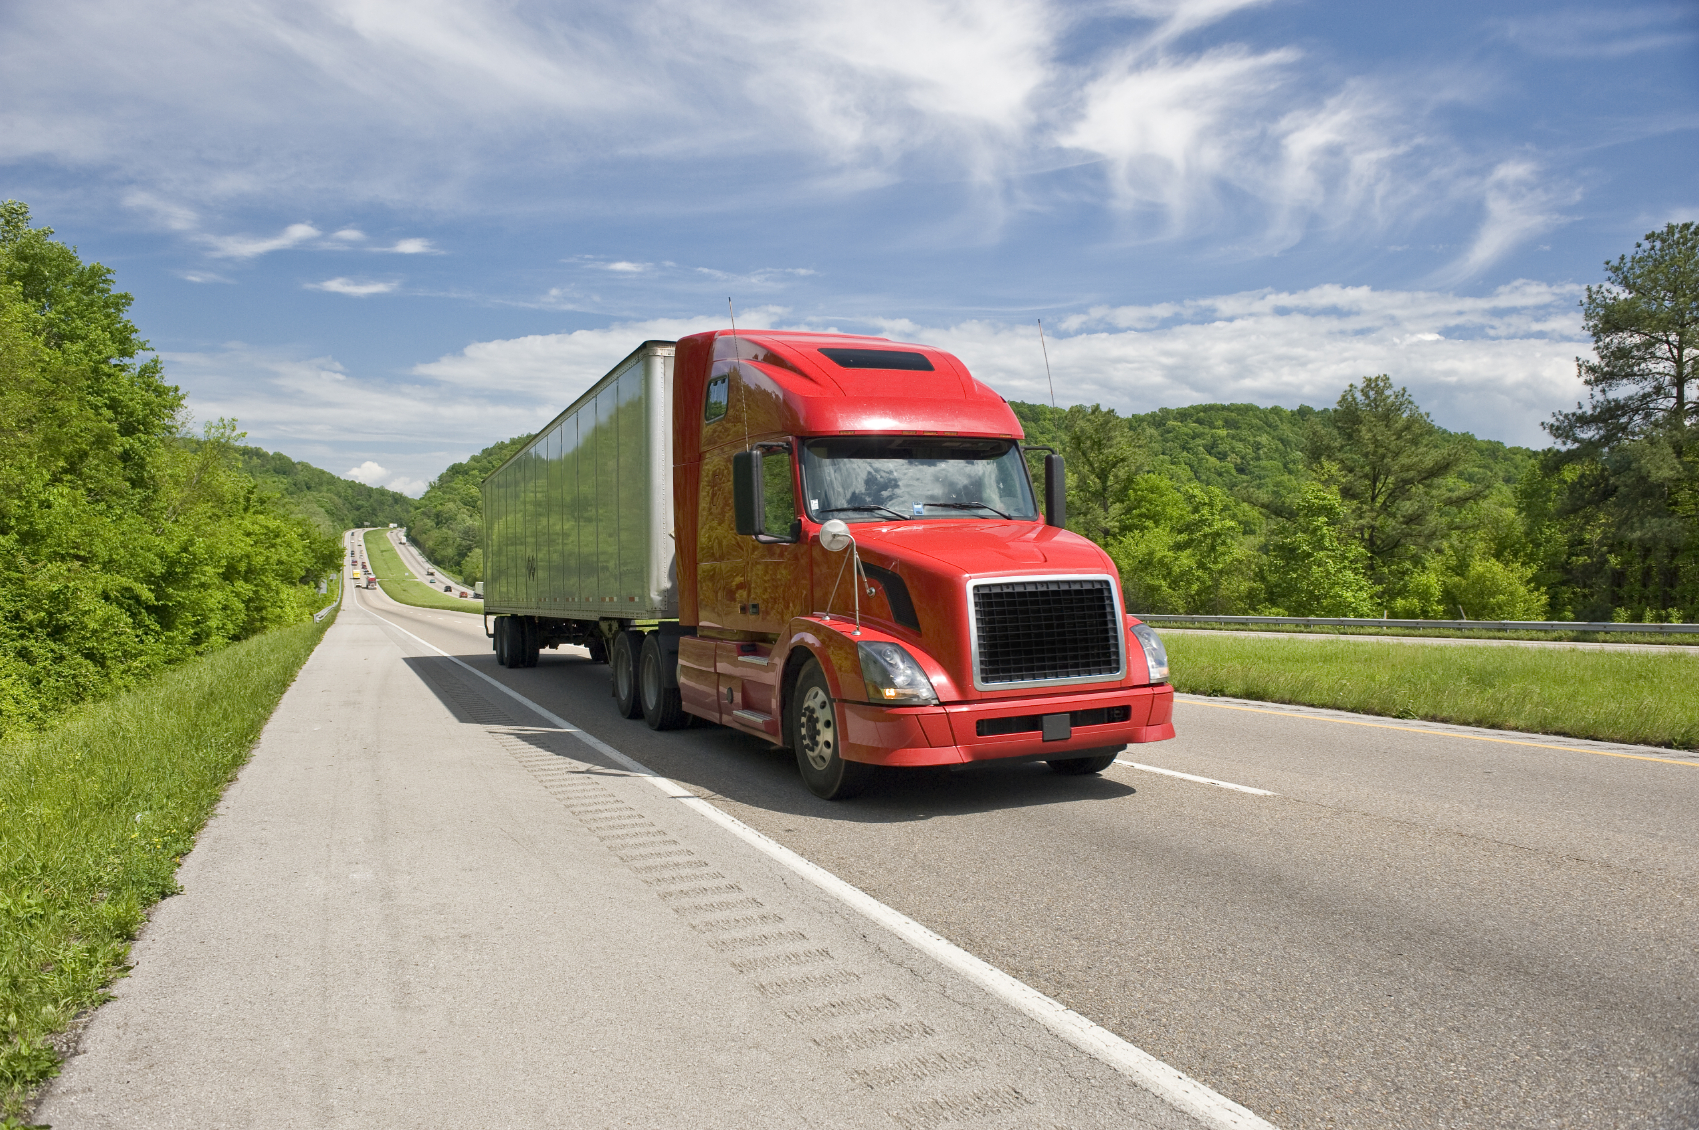 Trucker's Career Guide - Where To Find Dry Van Truck Driving Jobs